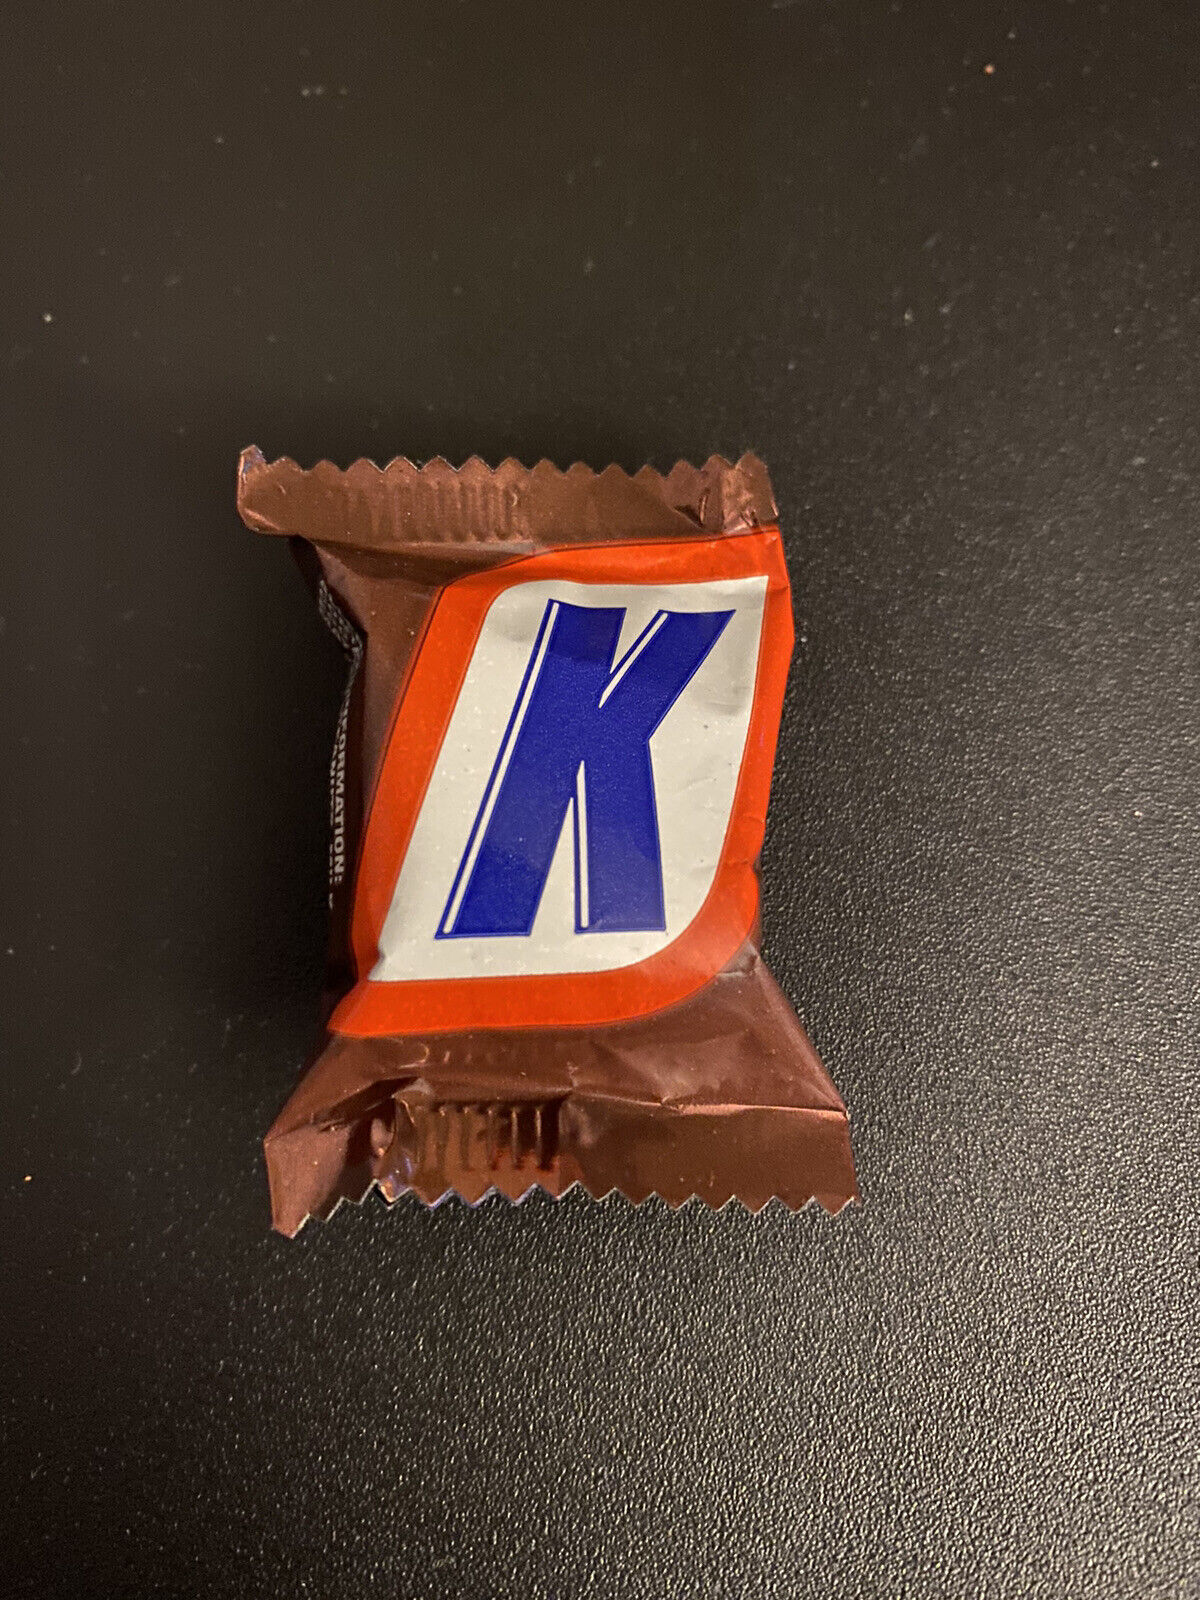 Factory Defect EMPTY Unopened Air-Puffed Snickers Mini Candy Wrapper: K on Cover